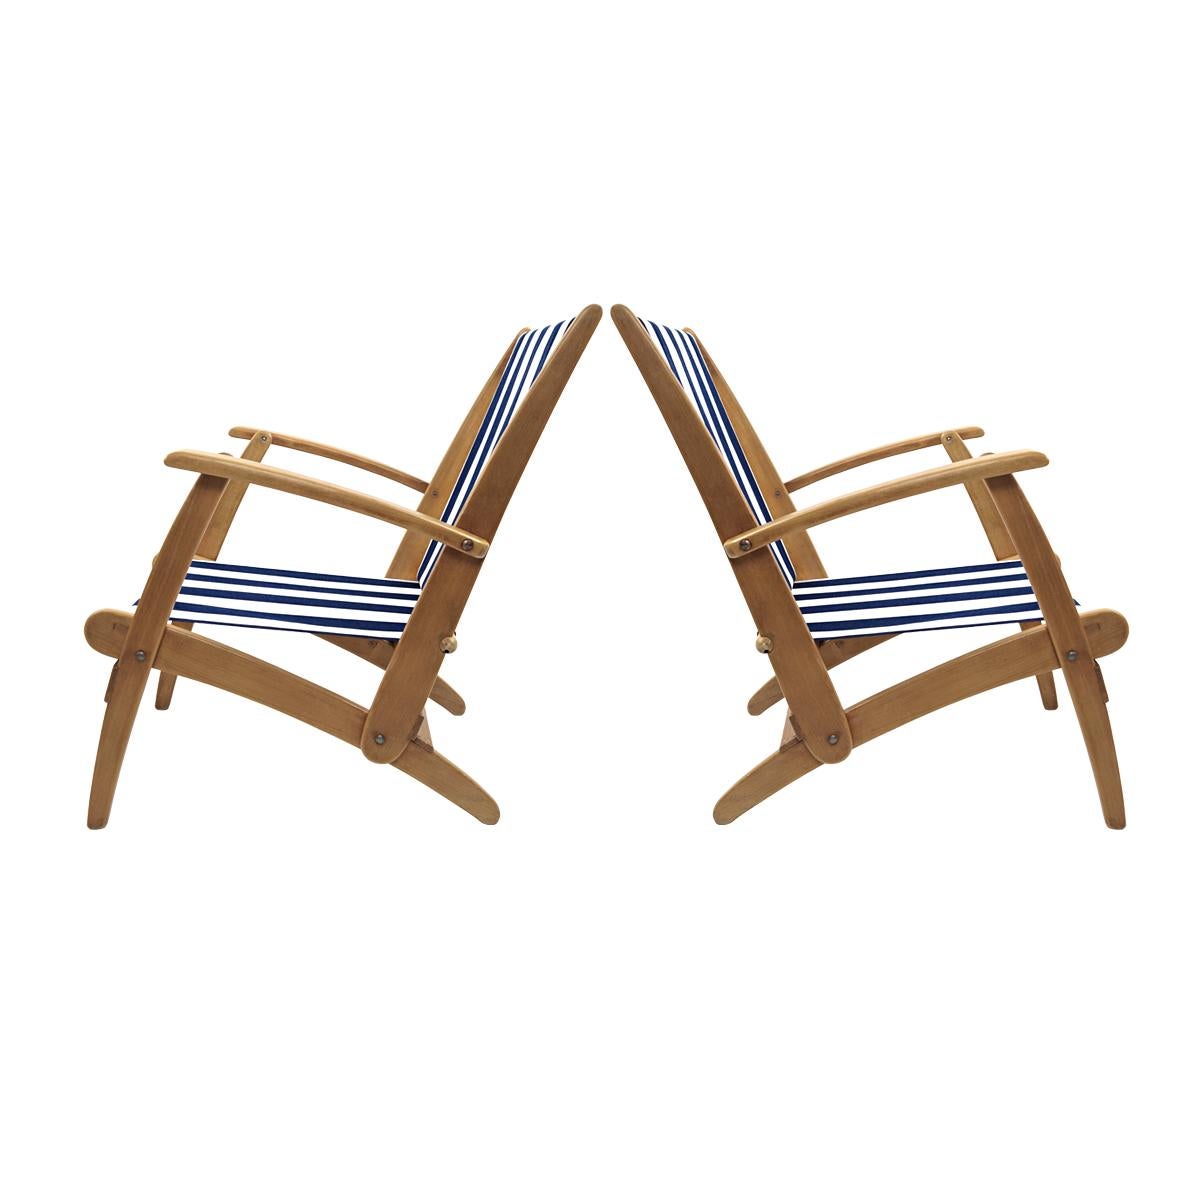 Two beautiful and comfortable folding chairs made of wood and blue white striped fabric. Originally they were the deck chairs on the adventure ship 'Gracias'. They would look great in your garden, terrace or along your pool.
The Dutch writer Piet